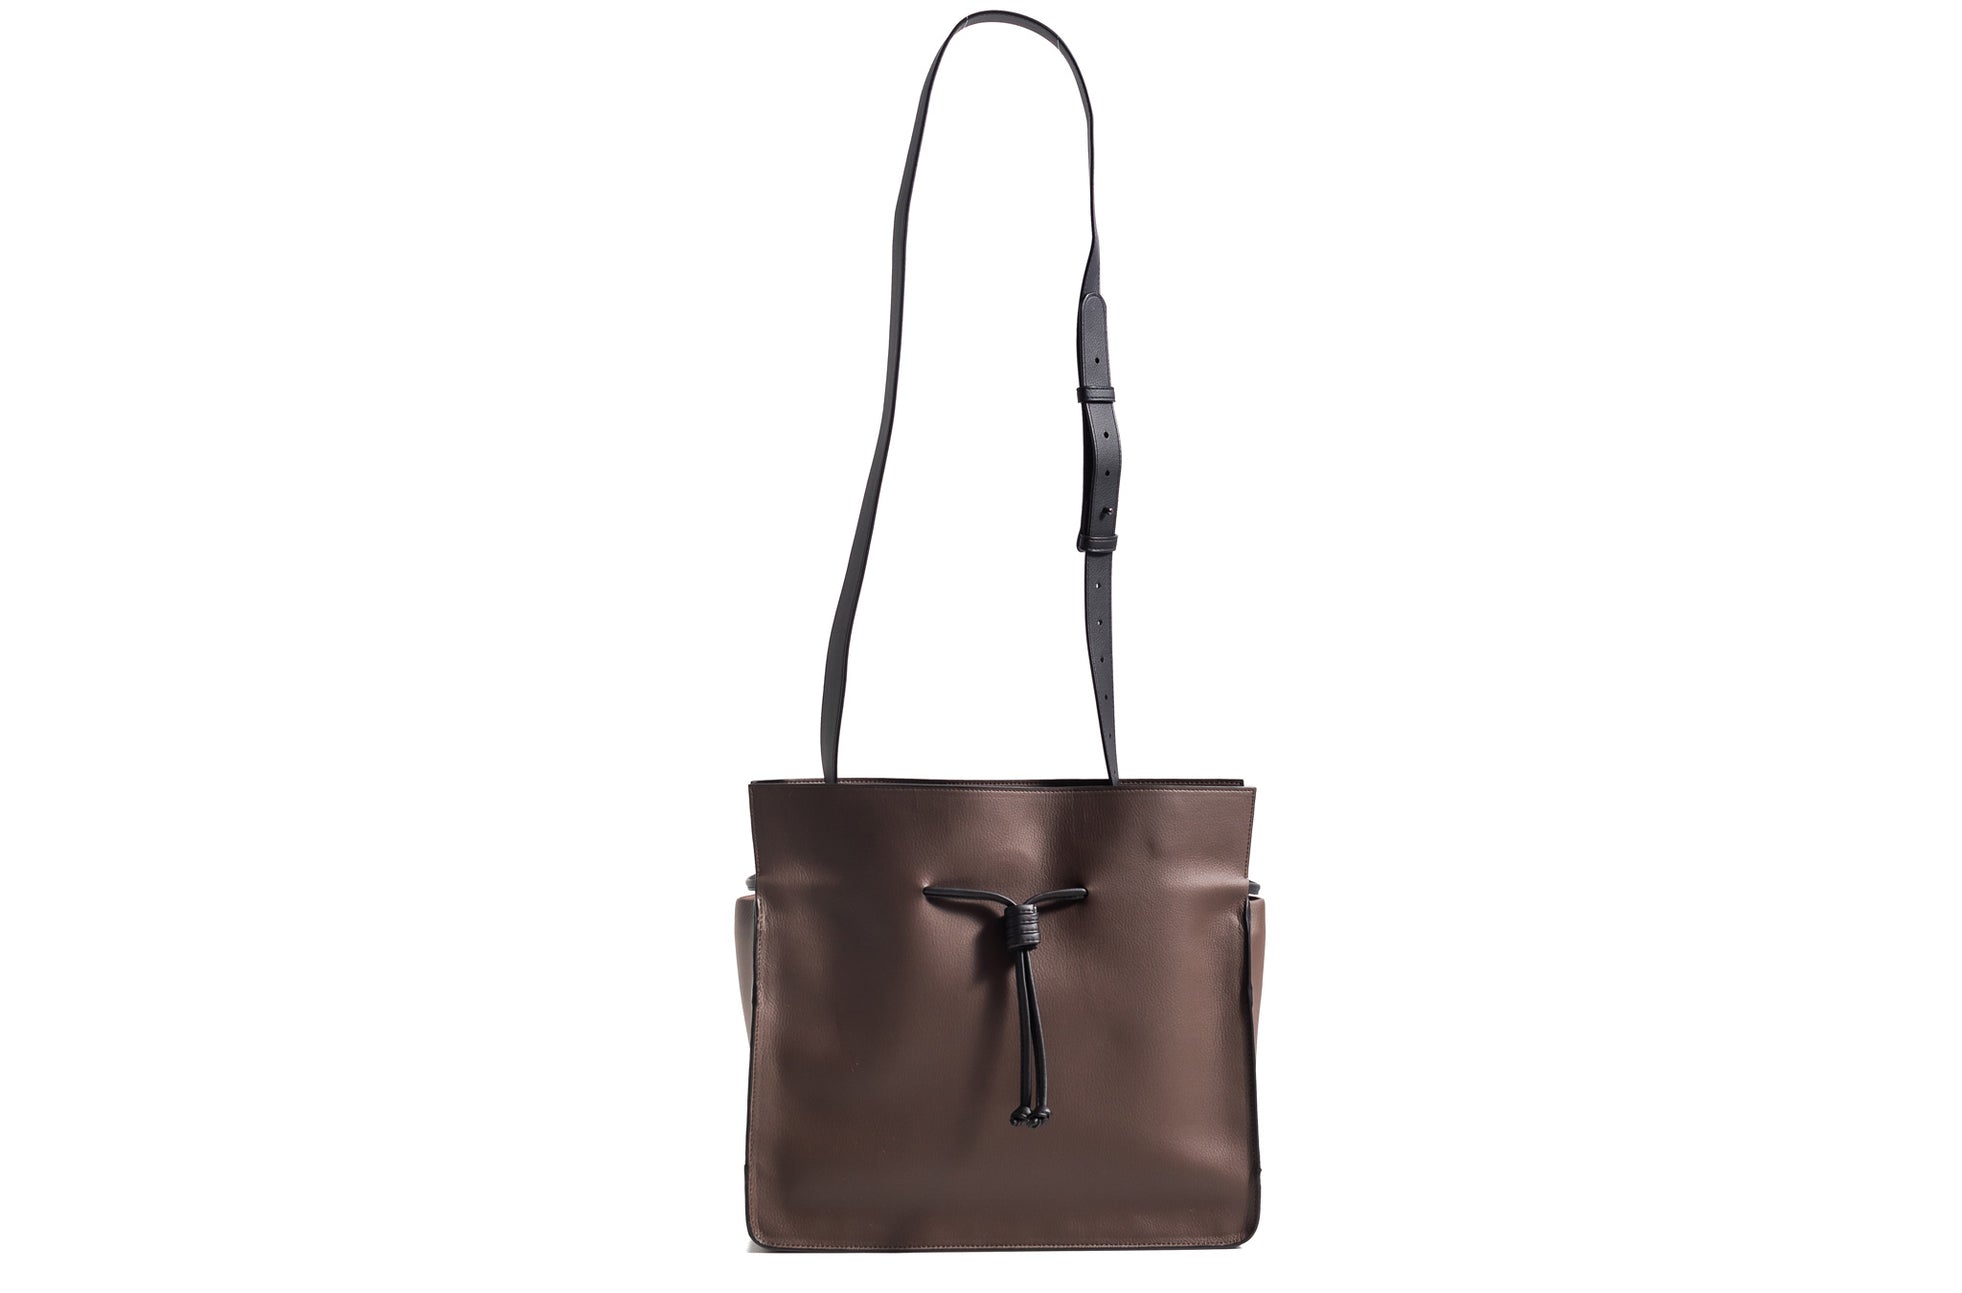 The Medium Shopper in Technik in Taupe and Black image 5